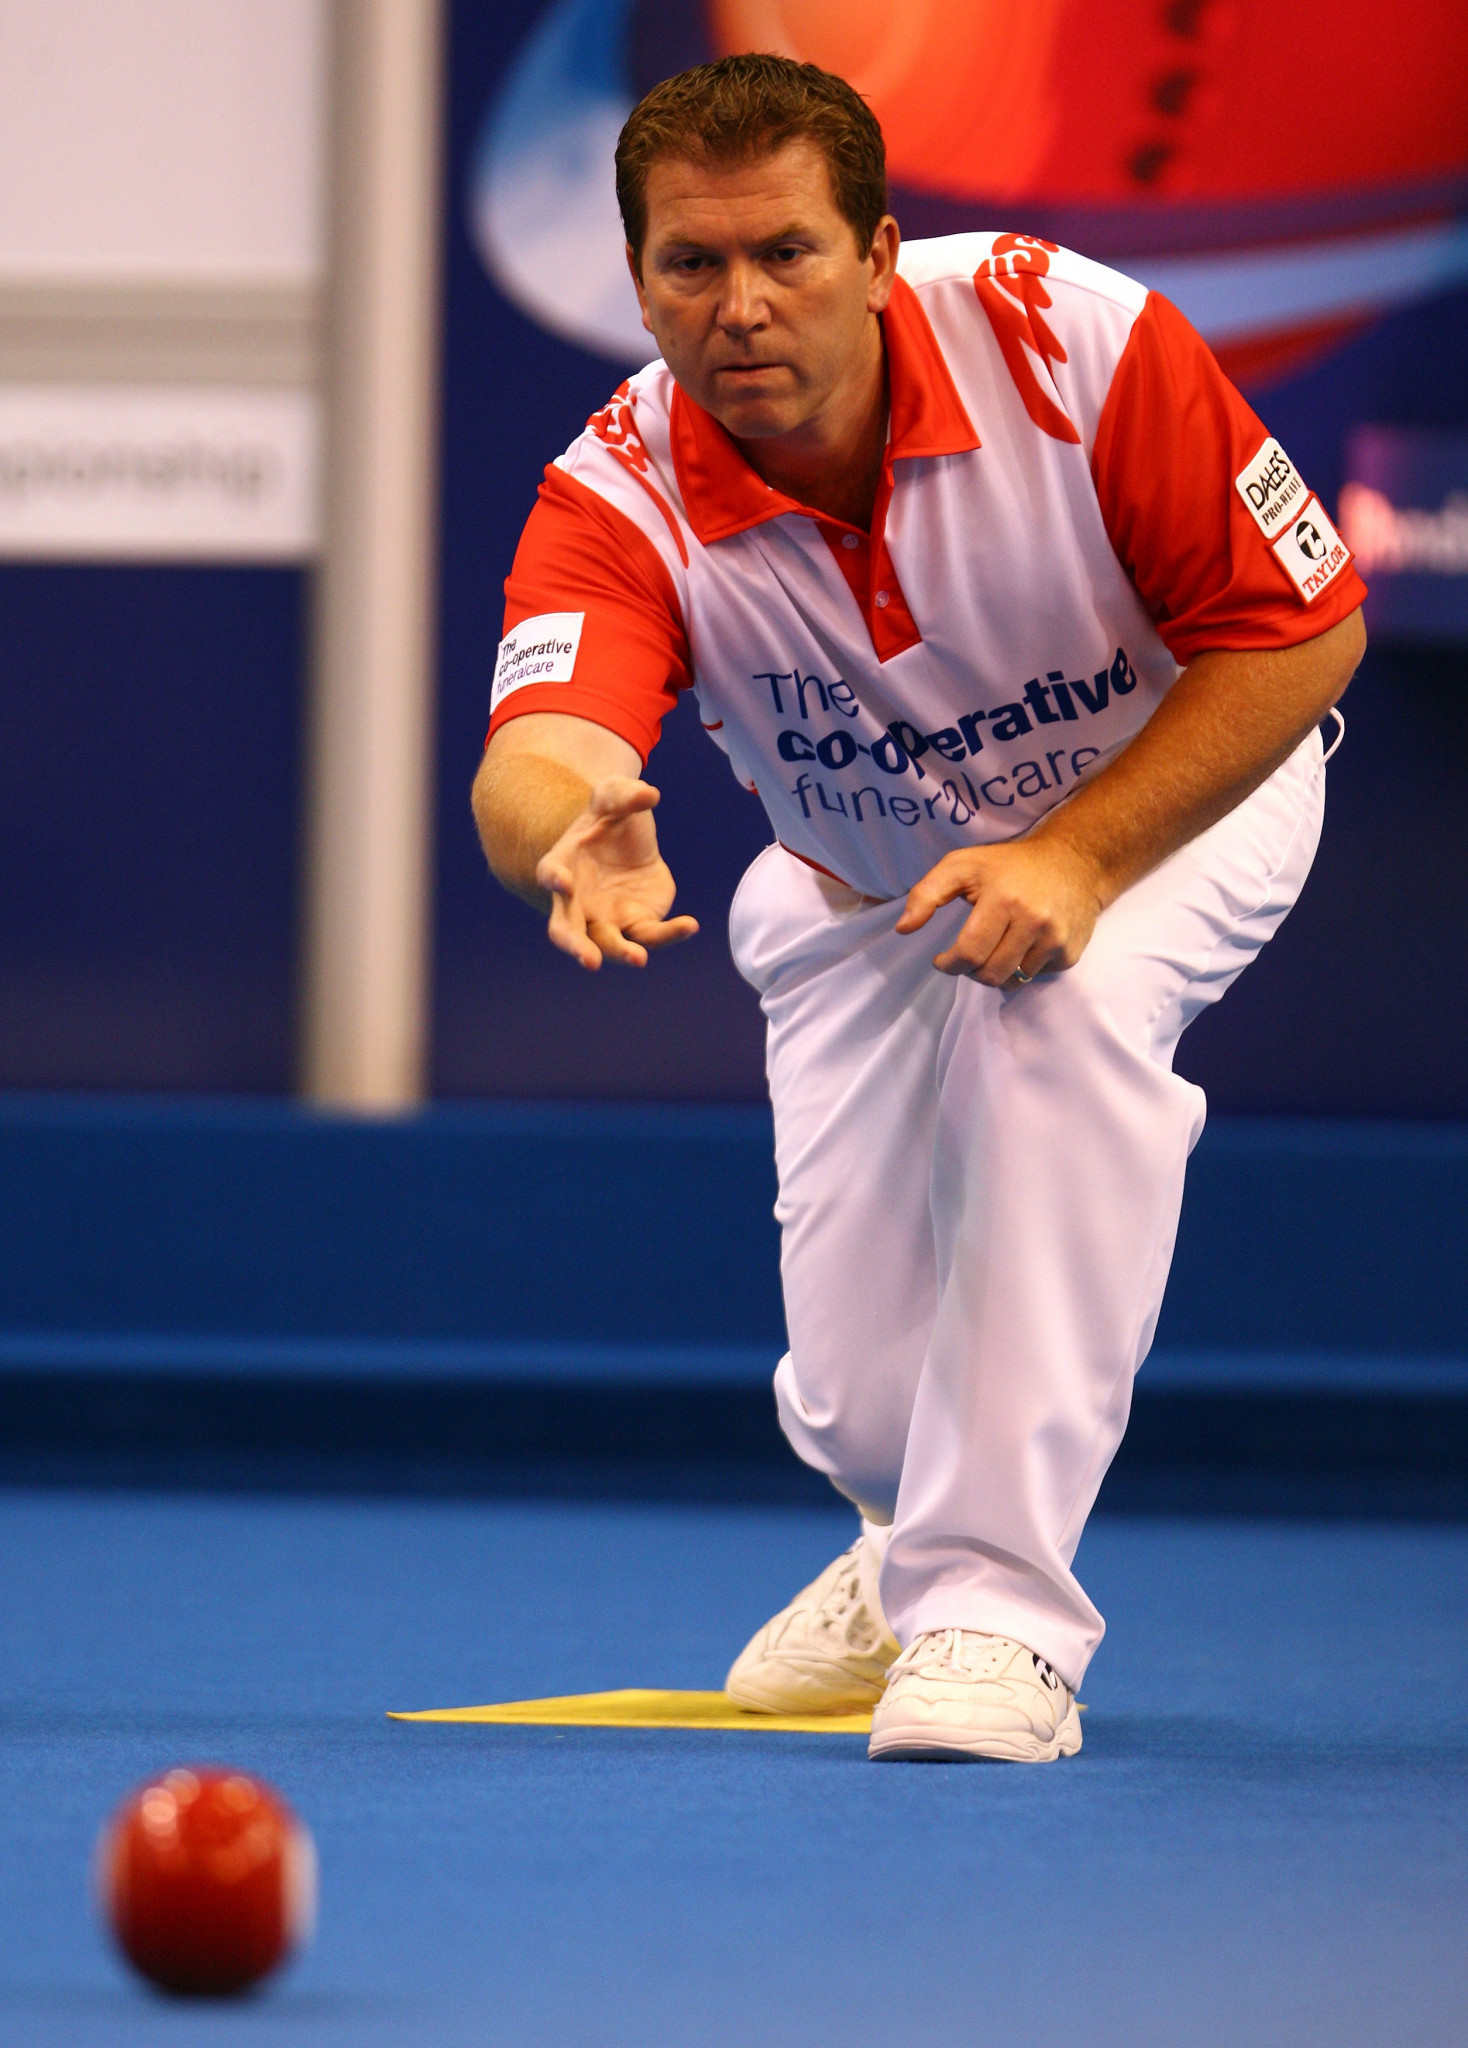 England's Mervyn King progressed to the semi-final of the World Indoor Bowls Championships alongside teammate Scotland's David Gourlay ©Getty Images